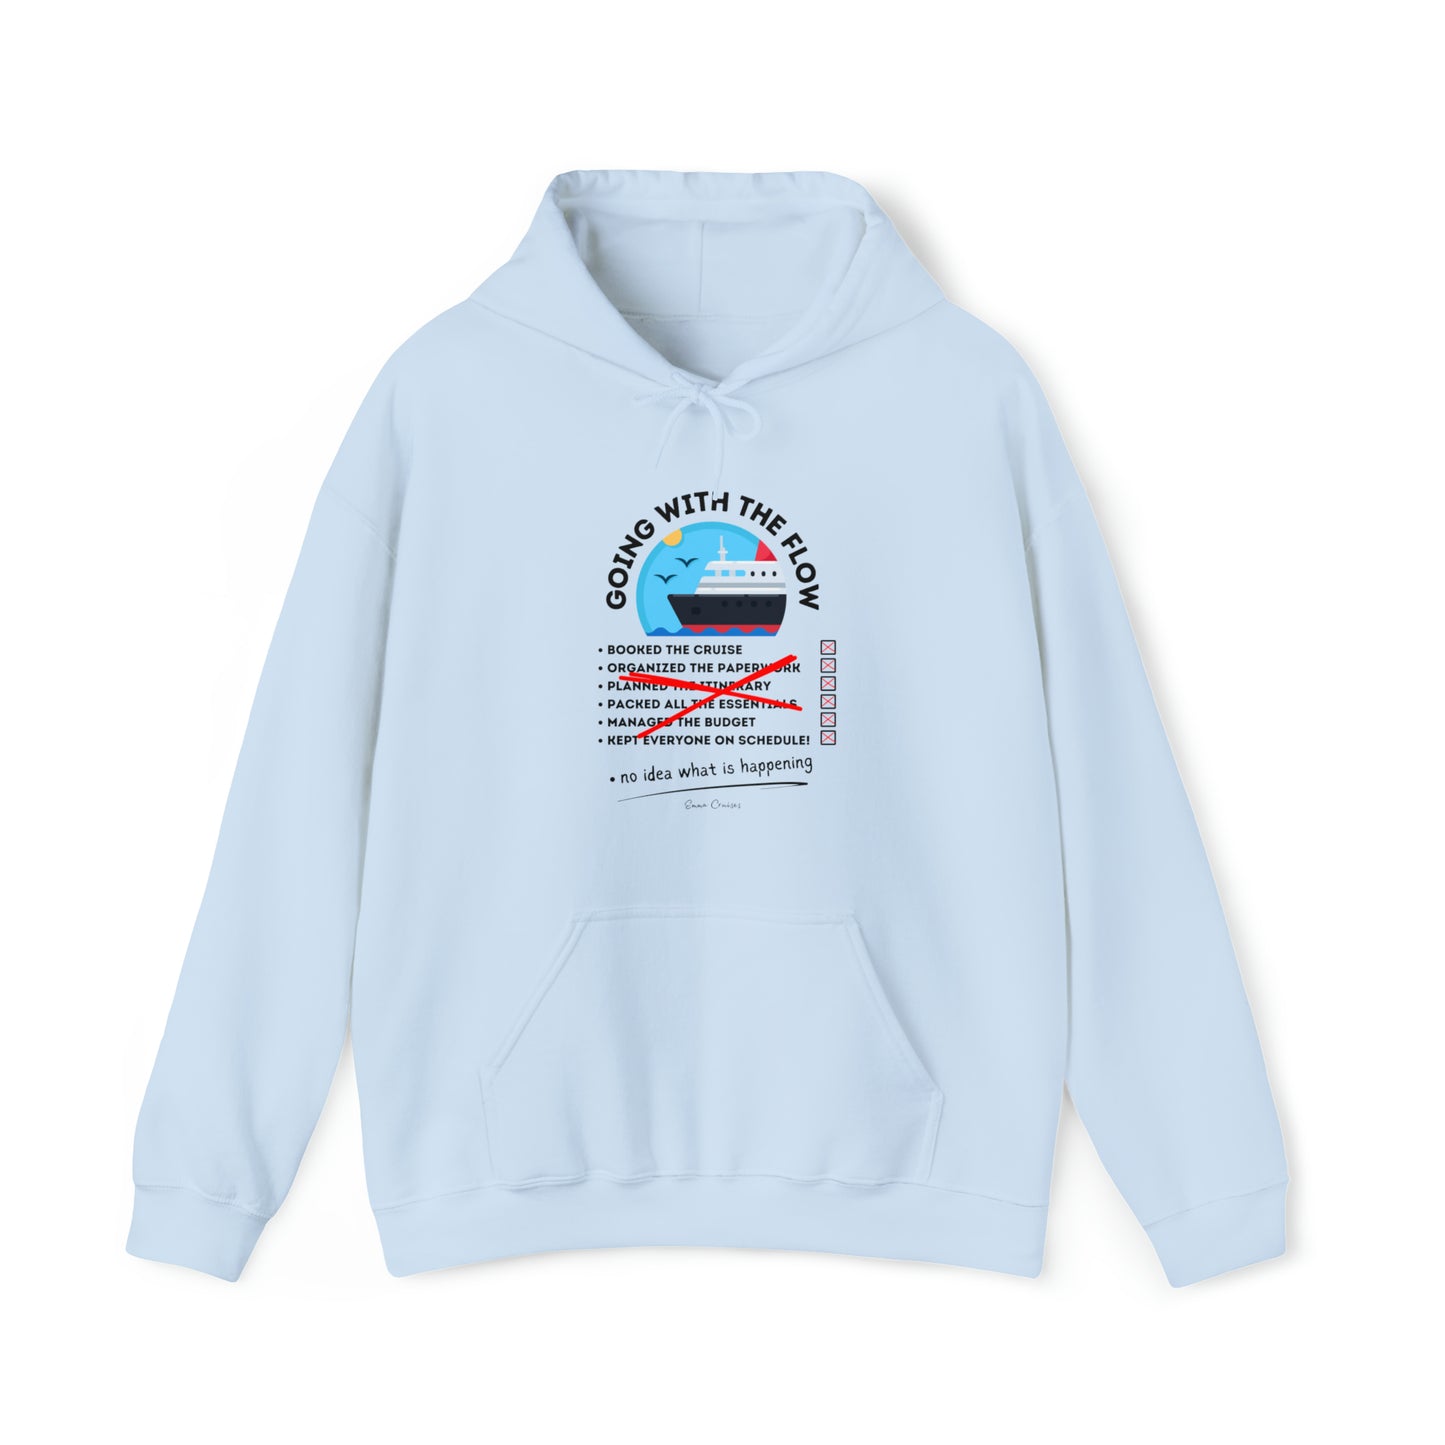 I'm Going With the Flow - UNISEX Hoodie